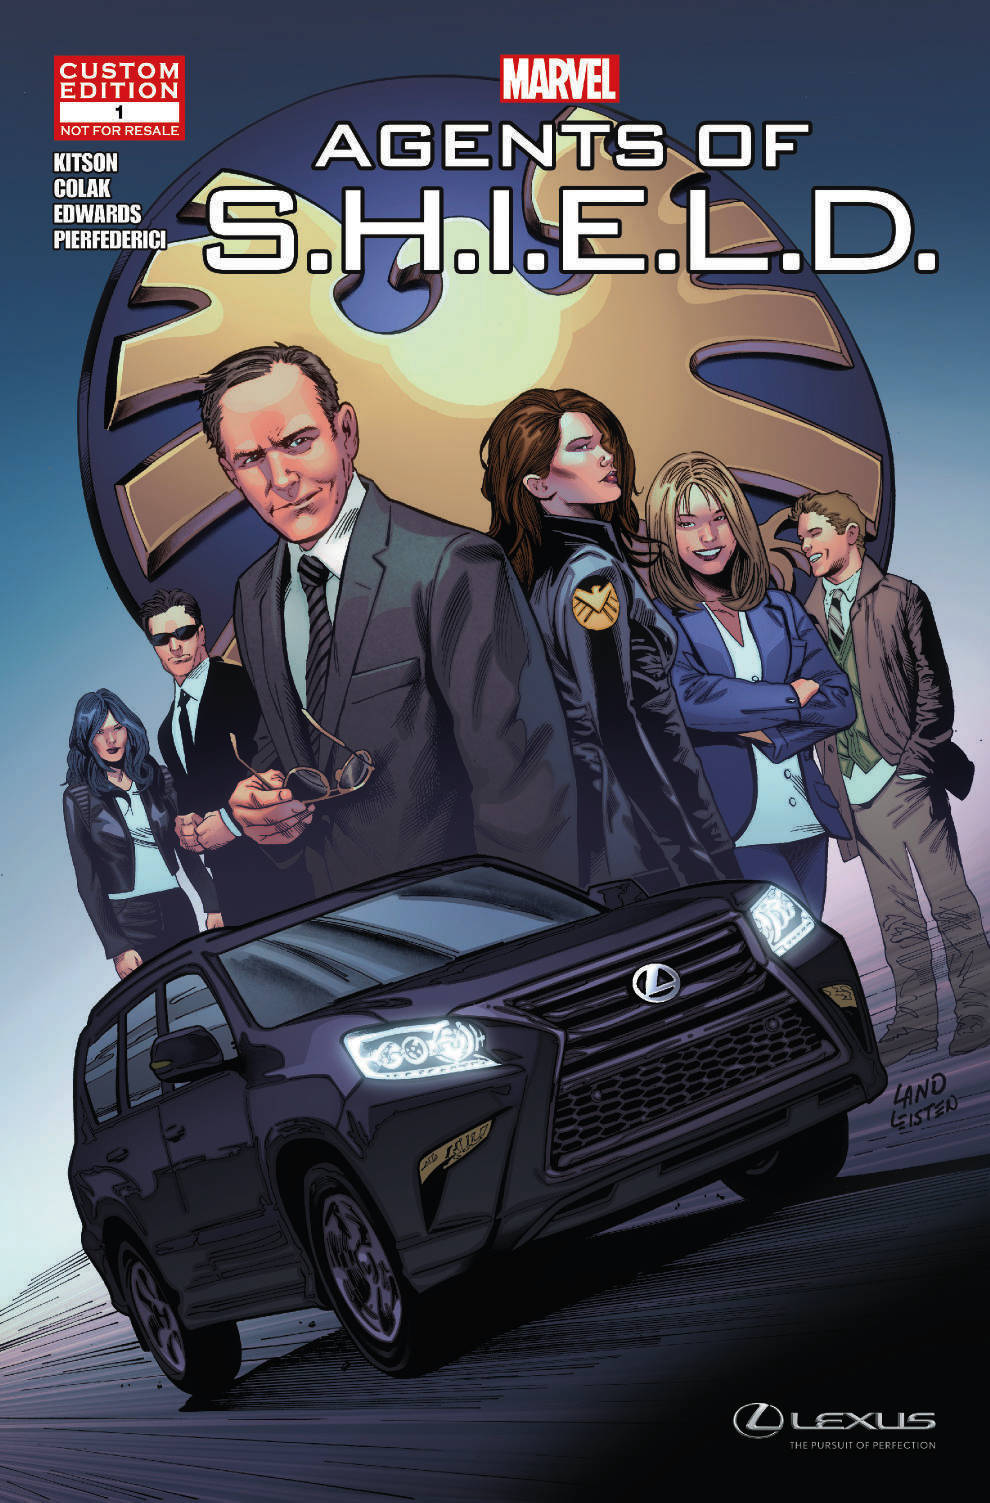 Lexus Presents: Marvel's Agents of . in THE CHASE (2014) #1 |  Comic Issues | Marvel